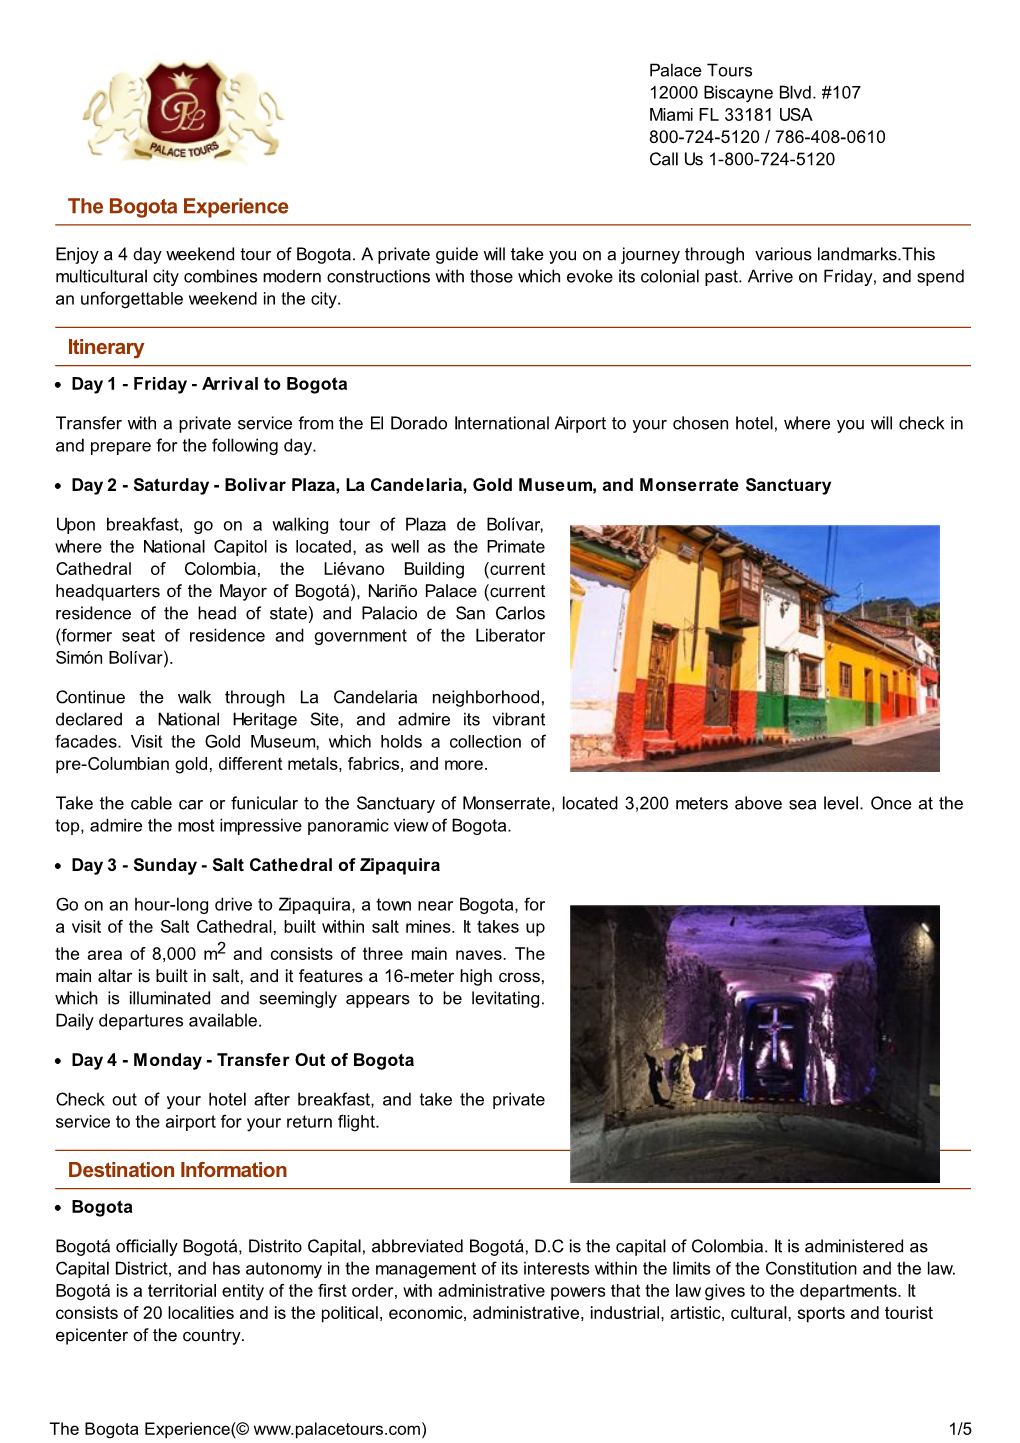 The Bogota Experience Itinerary Destination Information